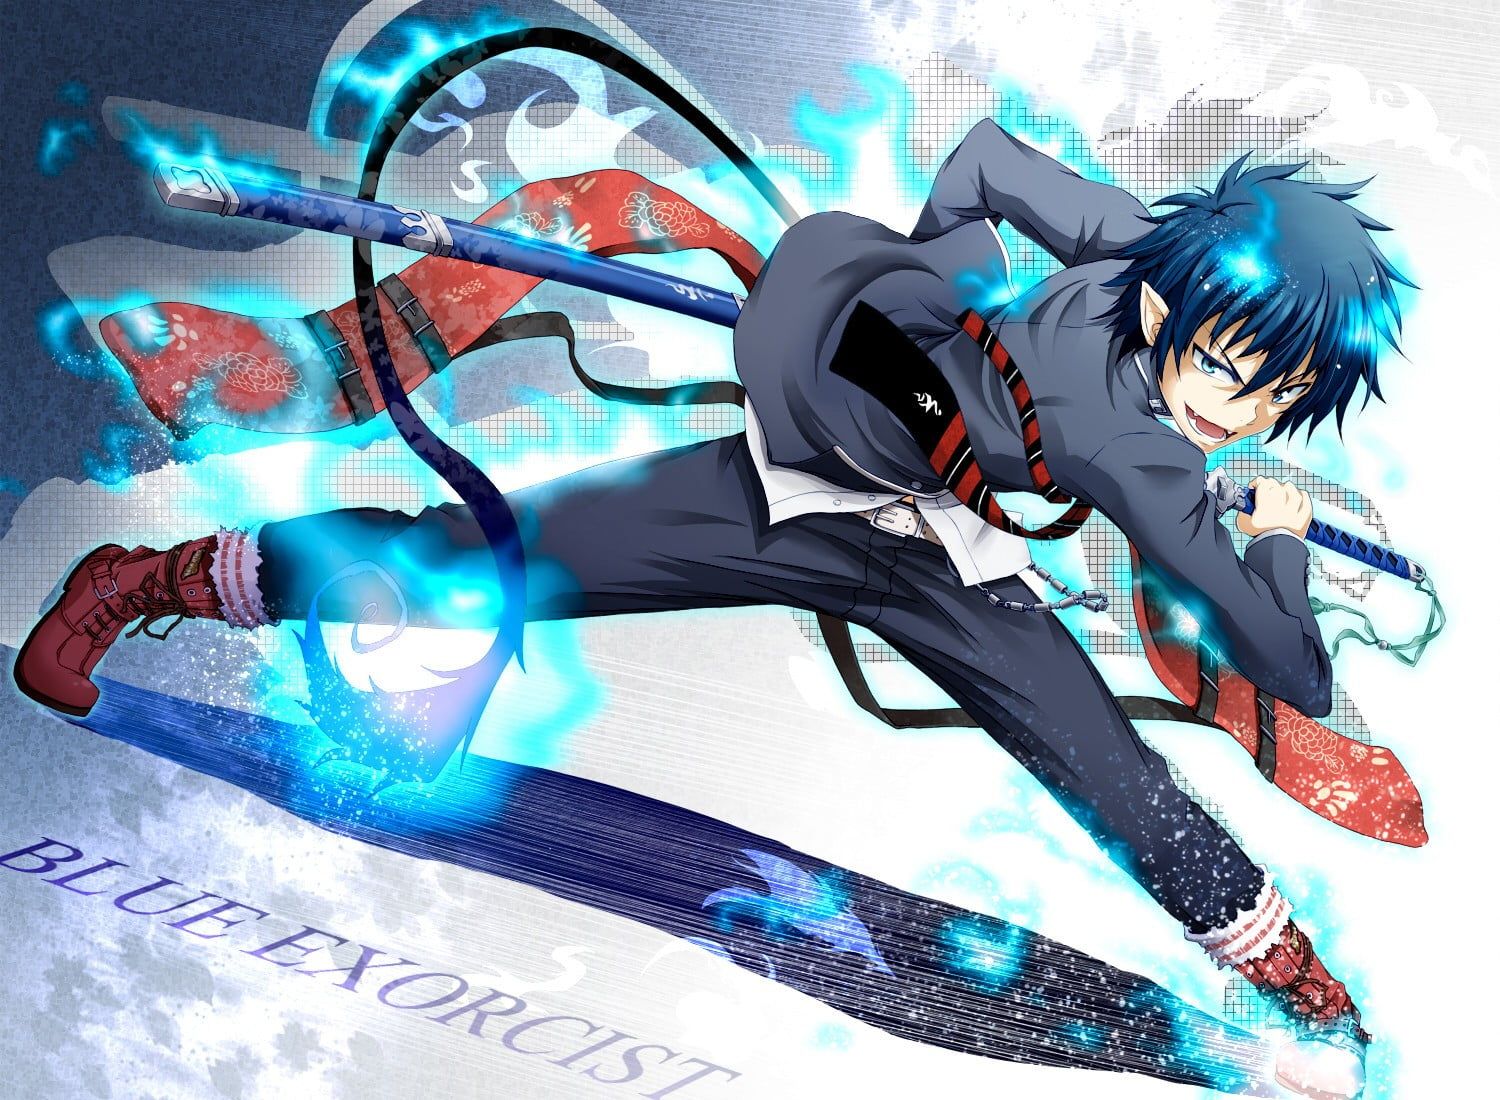 9. "Blue Exorcist" - wide 6